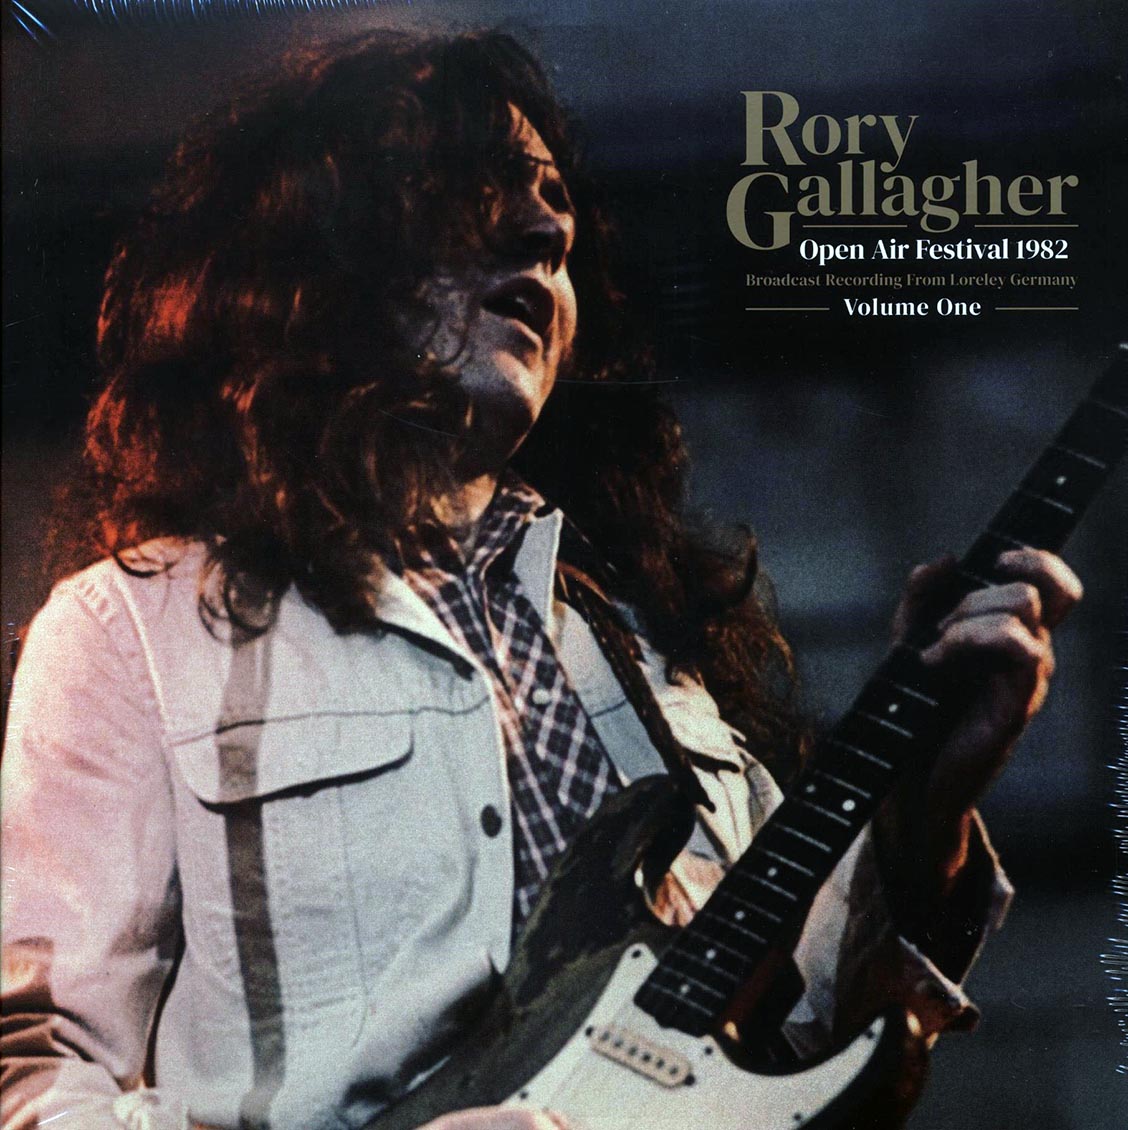 Rory Gallagher - Open Air Festival 1982 Volume 1: Broadcast Recording From Loreley Germany